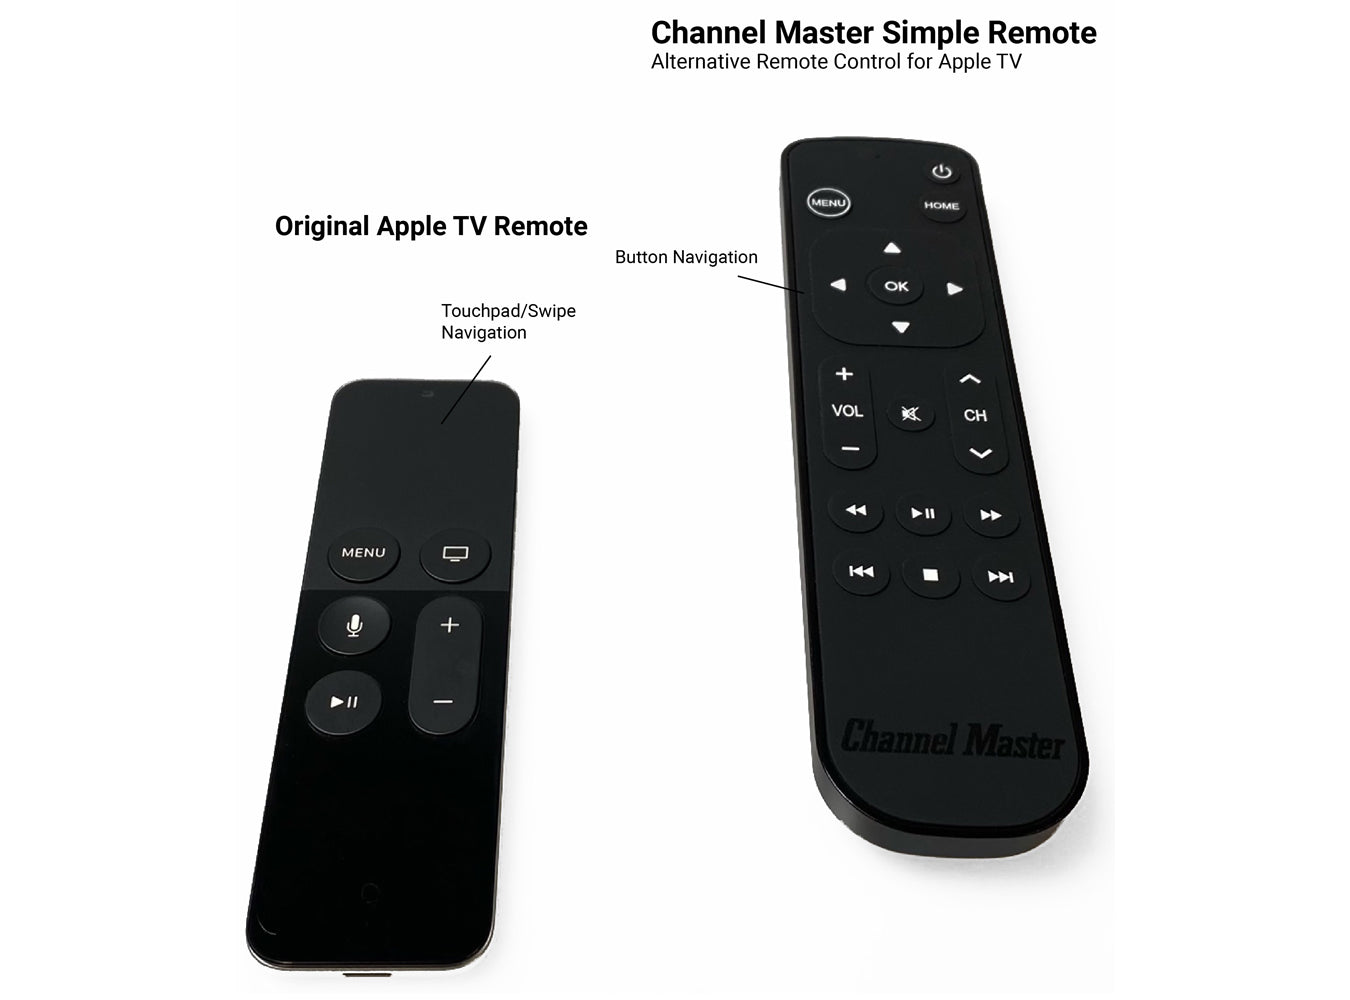 Museum hensigt Latter Simple Remote - Alternative Remote Control for Apple TV | Channel Master